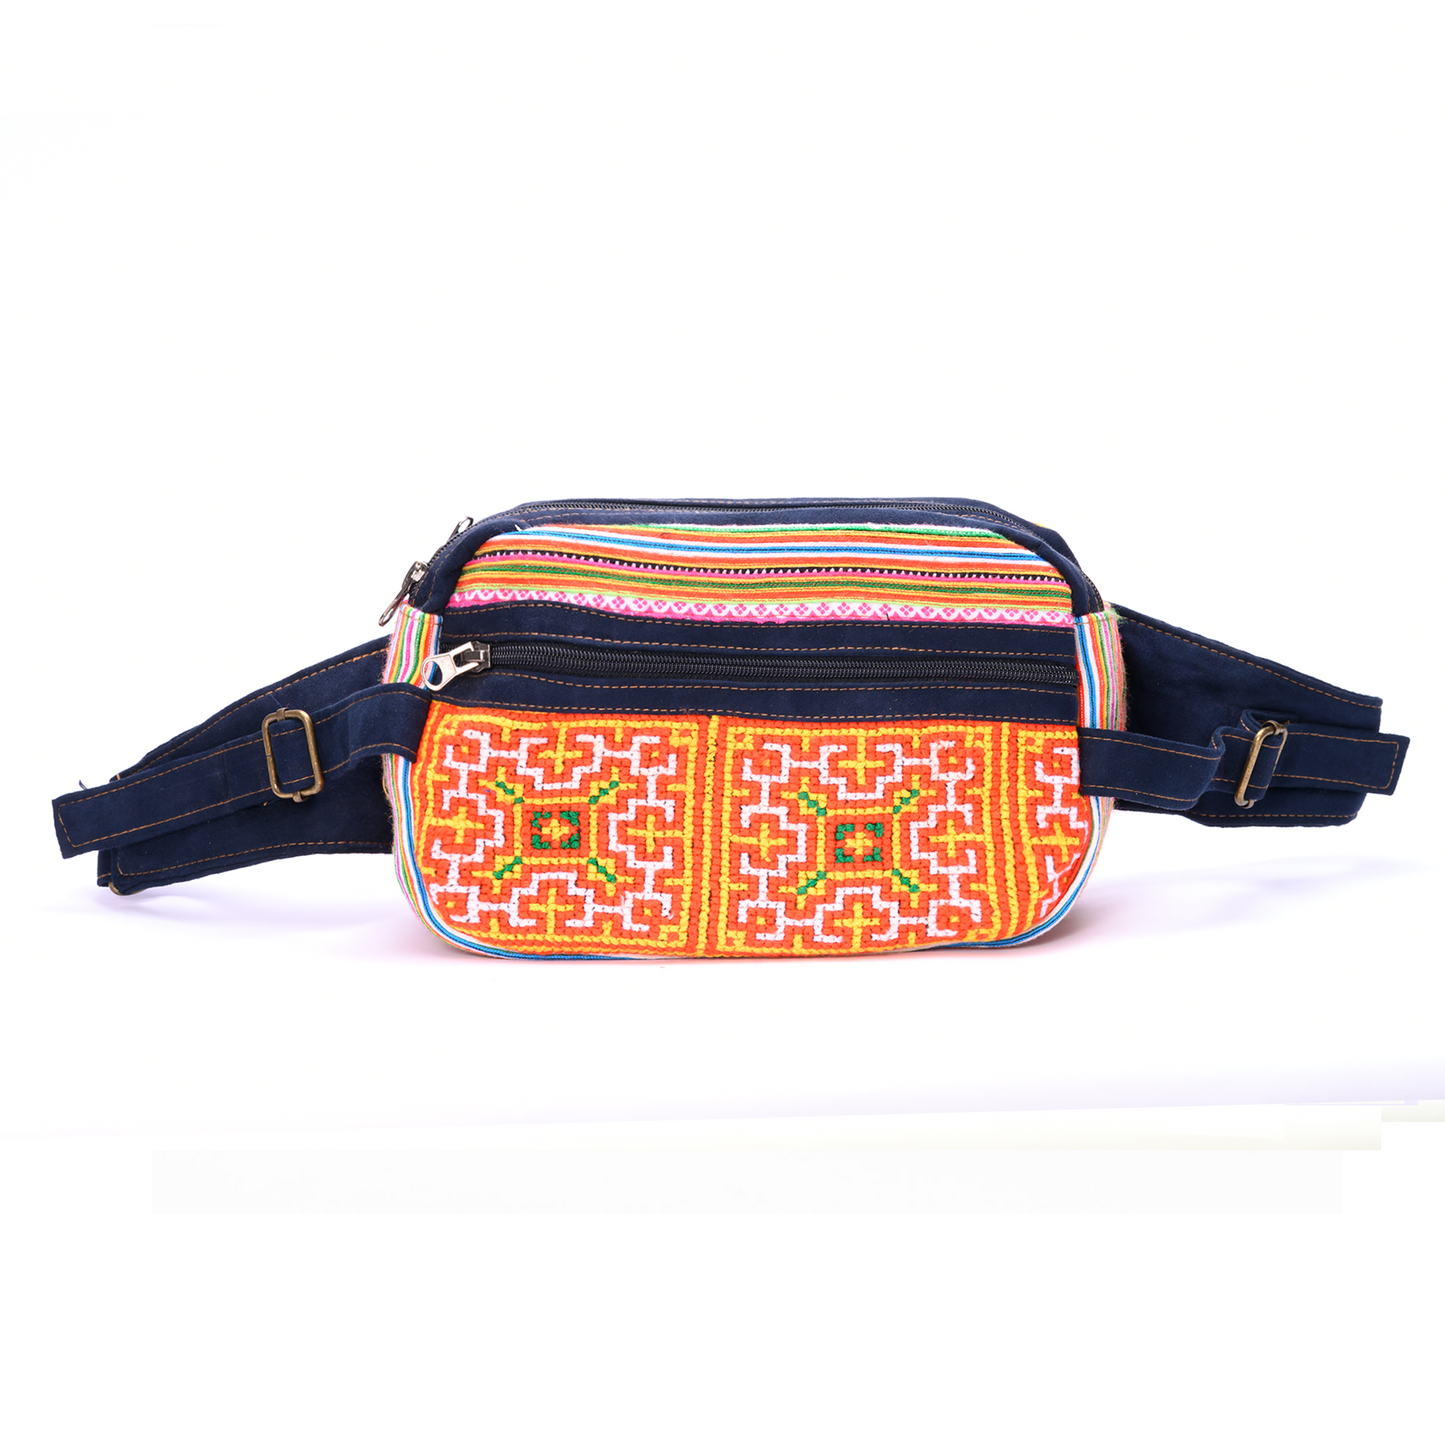 Orange Waist bag, embroidery and faux leather